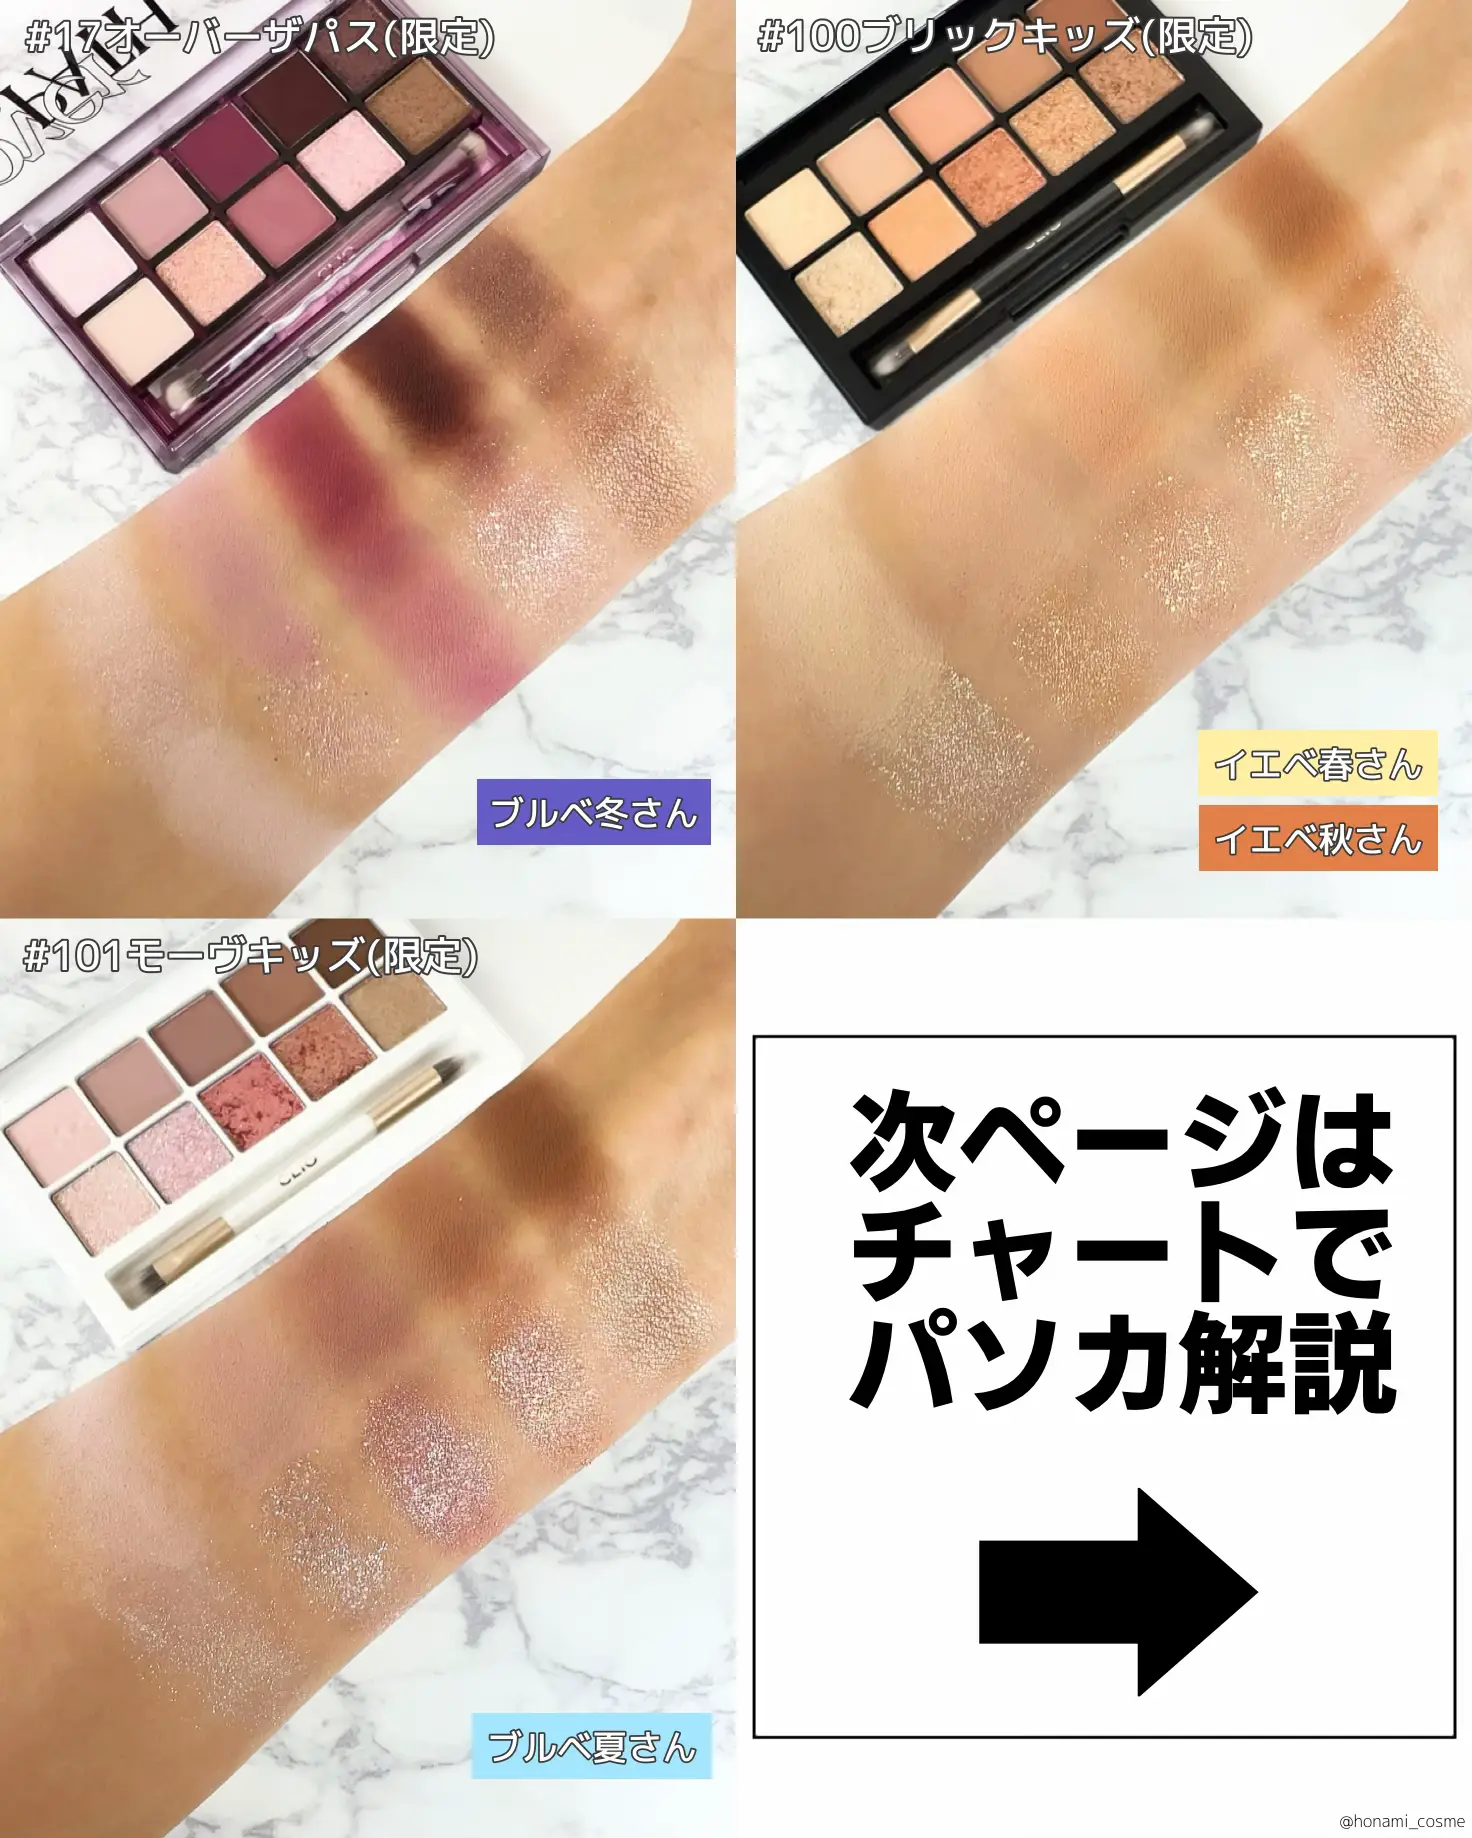 Complete Preservation Version] Latest! CLIO Pro Eye Palette All Colors  Review! ✨ / | Gallery posted by ｜ほなみ｜ | Lemon8